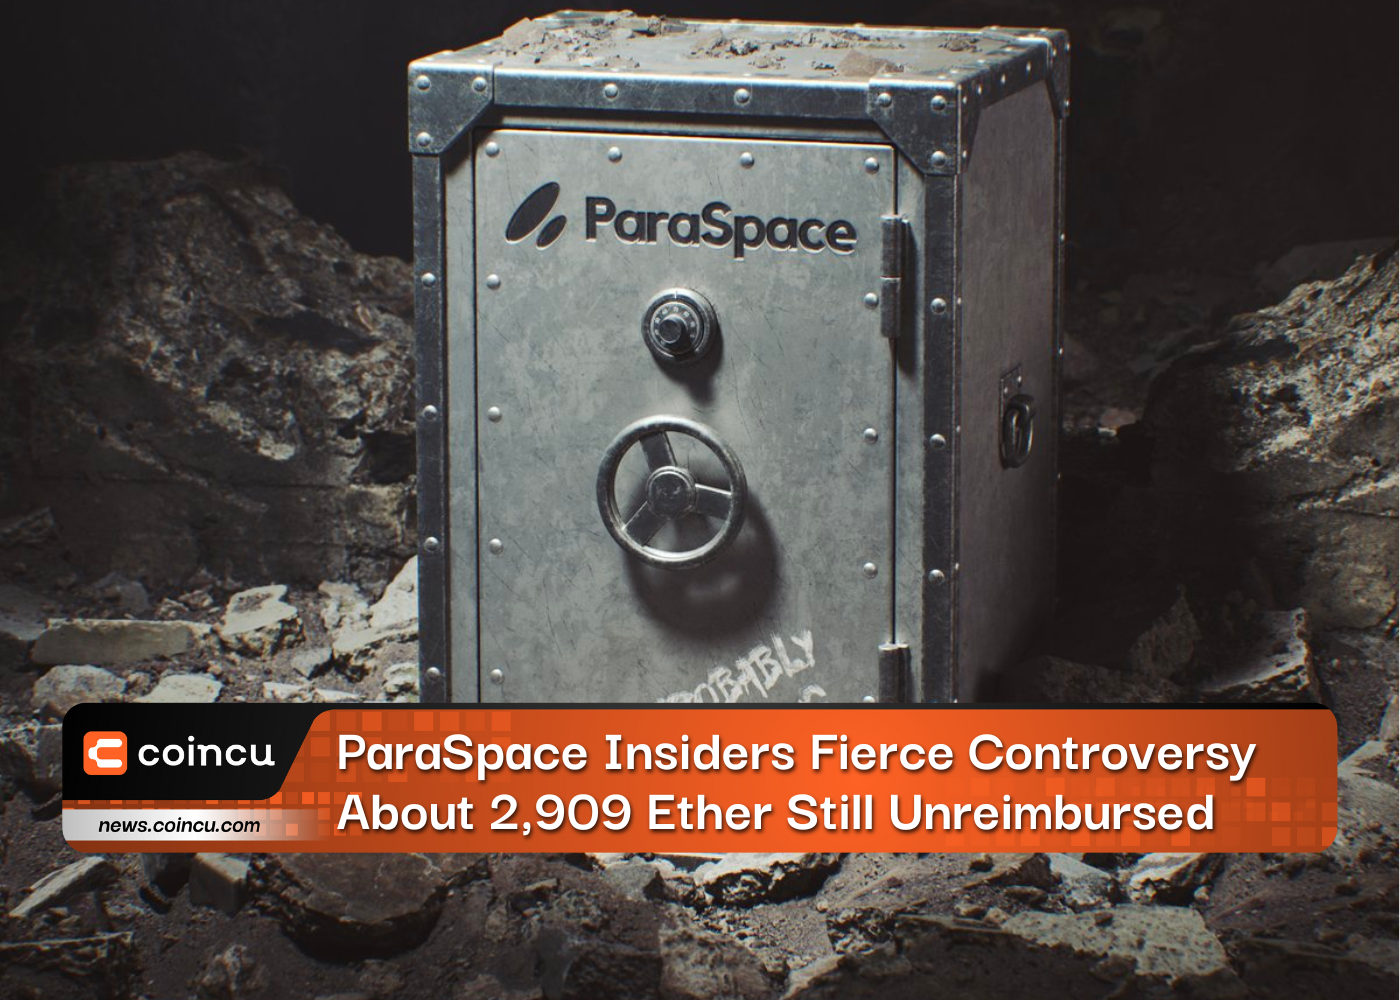 ParaSpace Insiders Fierce Controversy About 2,909 Ether Still Unreimbursed